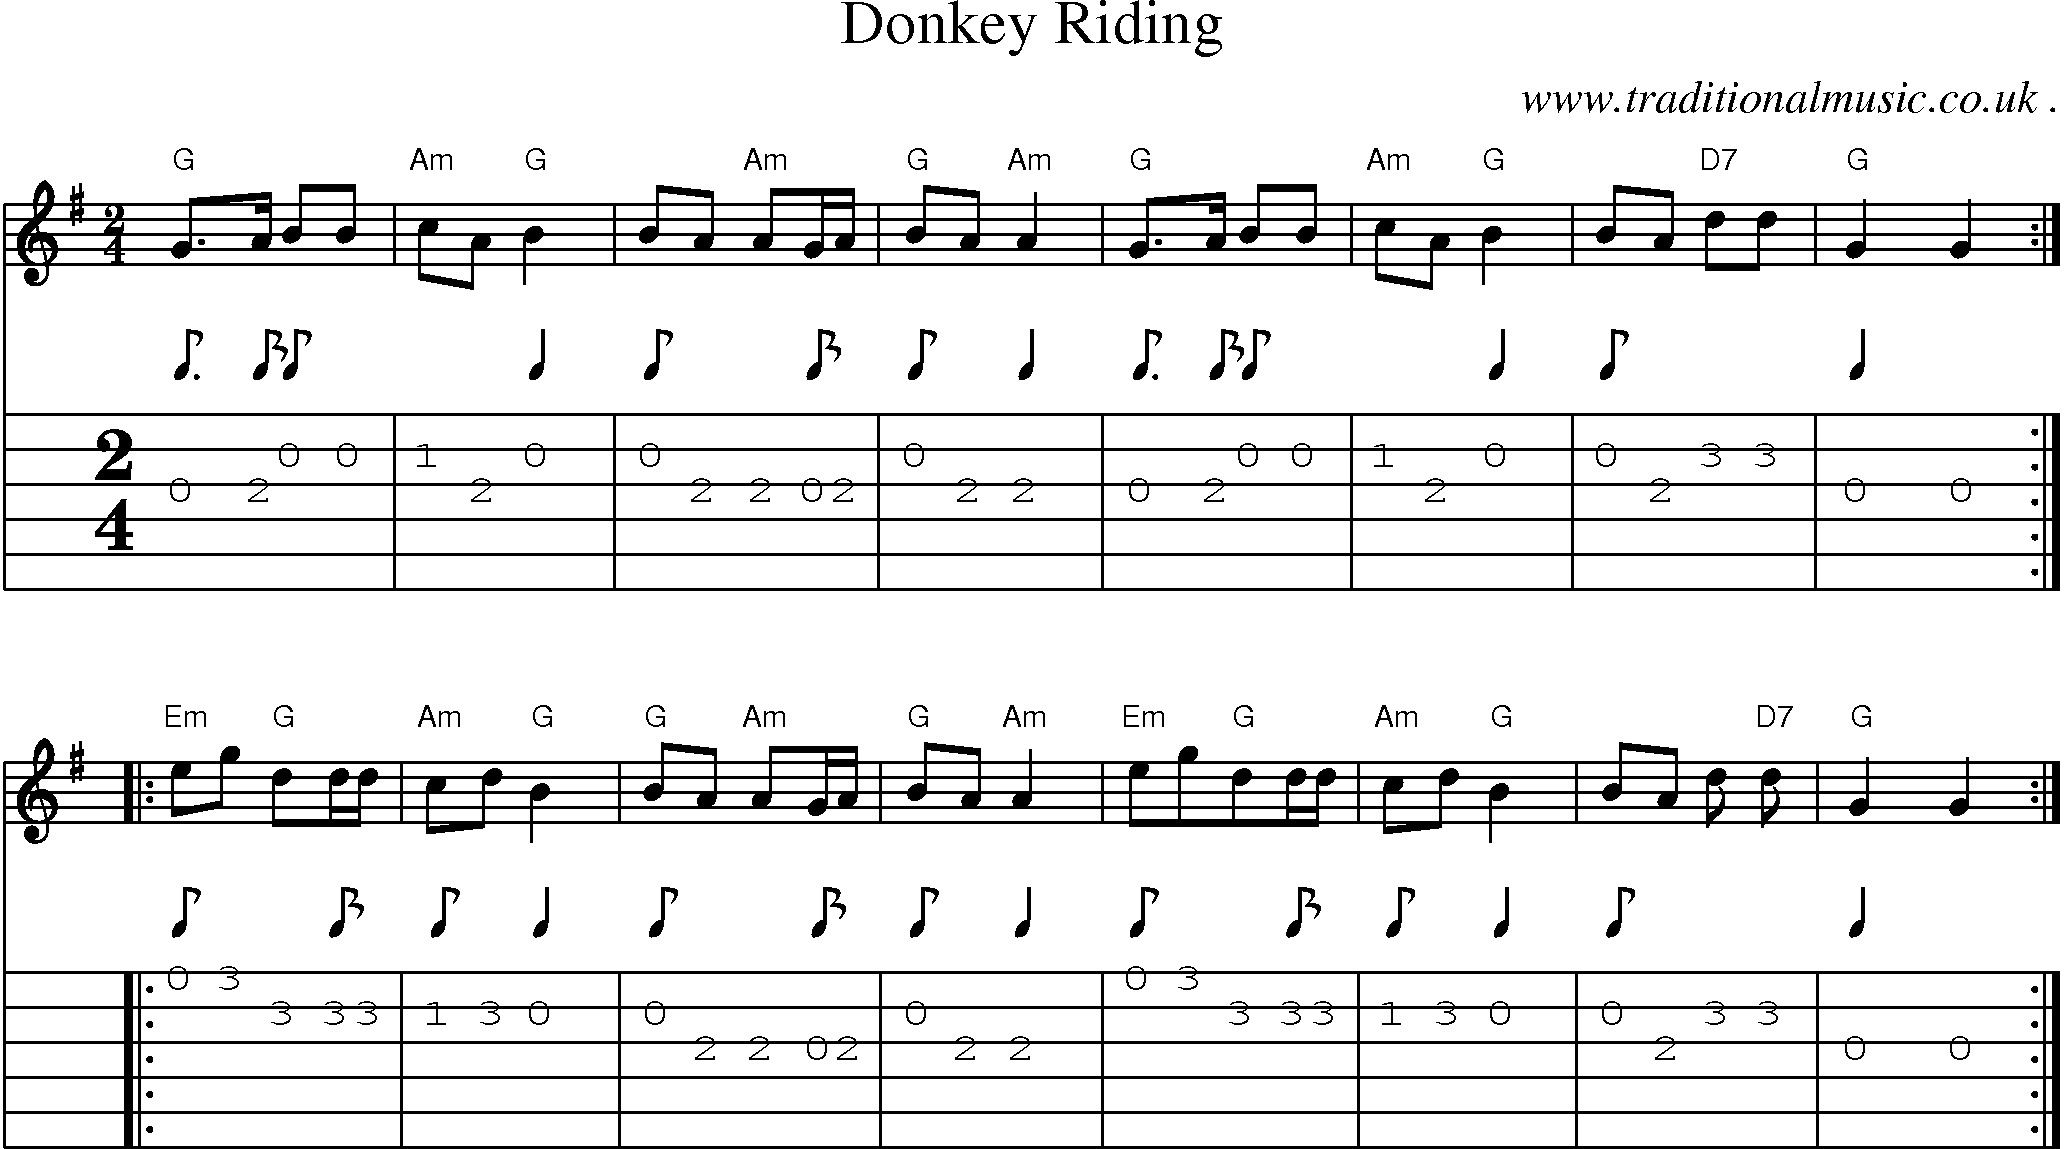 Music Score and Guitar Tabs for Donkey Riding